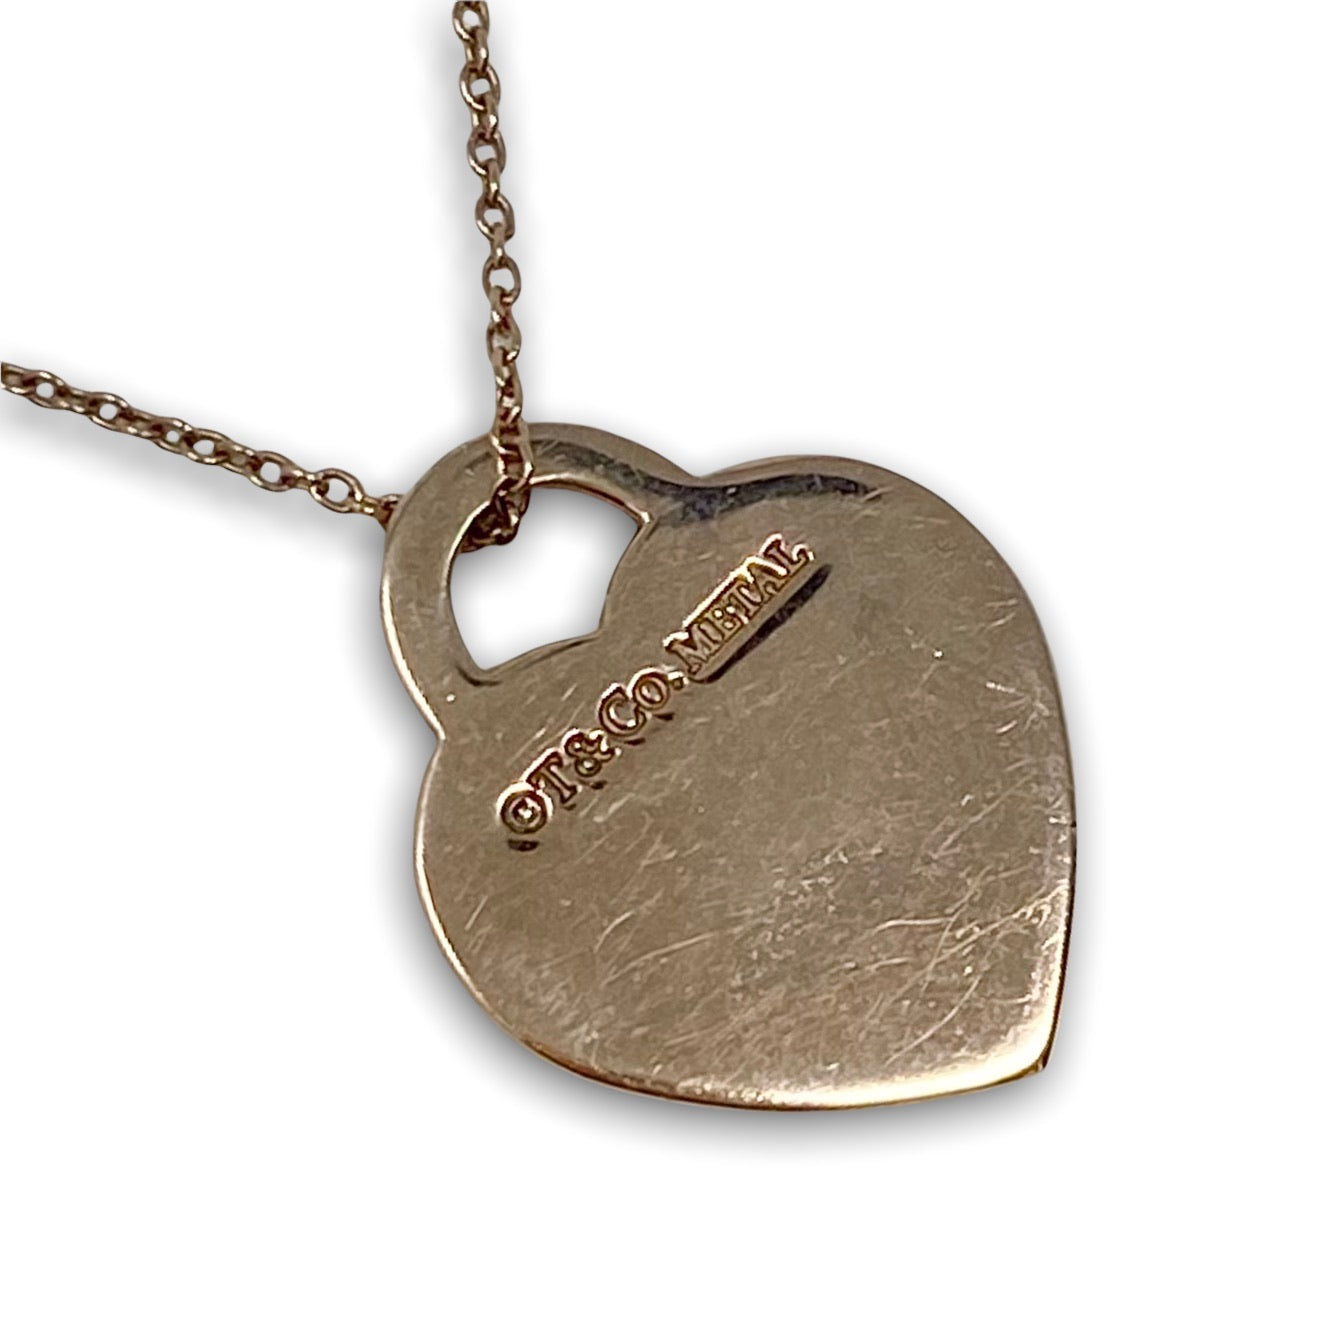 Tiffany & Co Rose Gold Heart Necklace